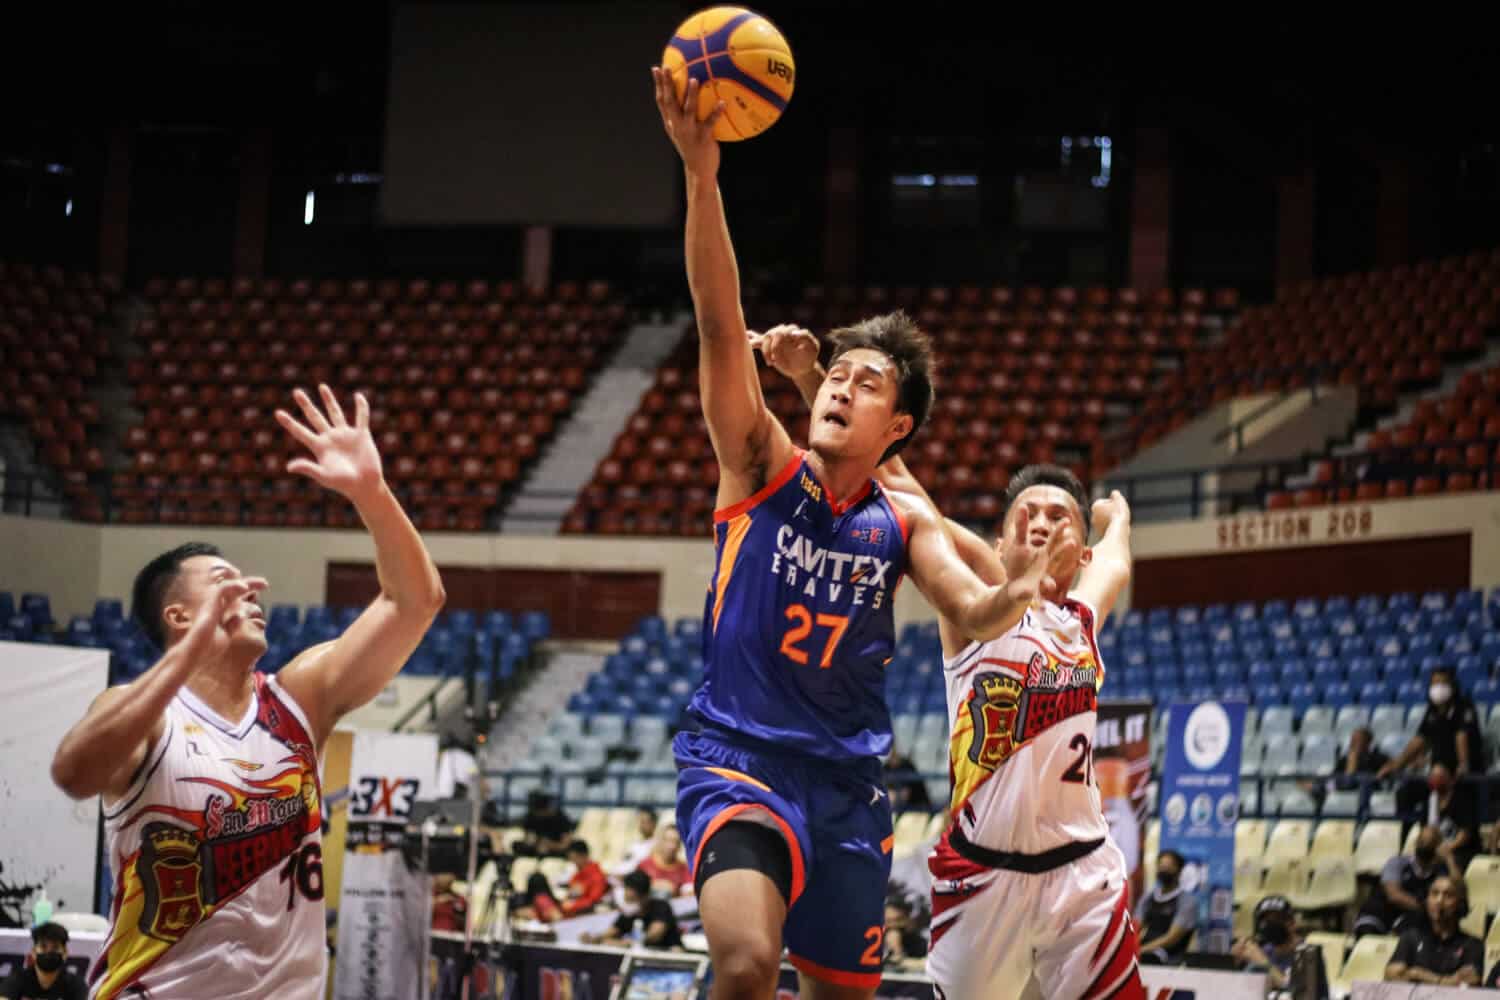 A basketball player is trying to block a ball during a PBA 3x3 Third Conference game.